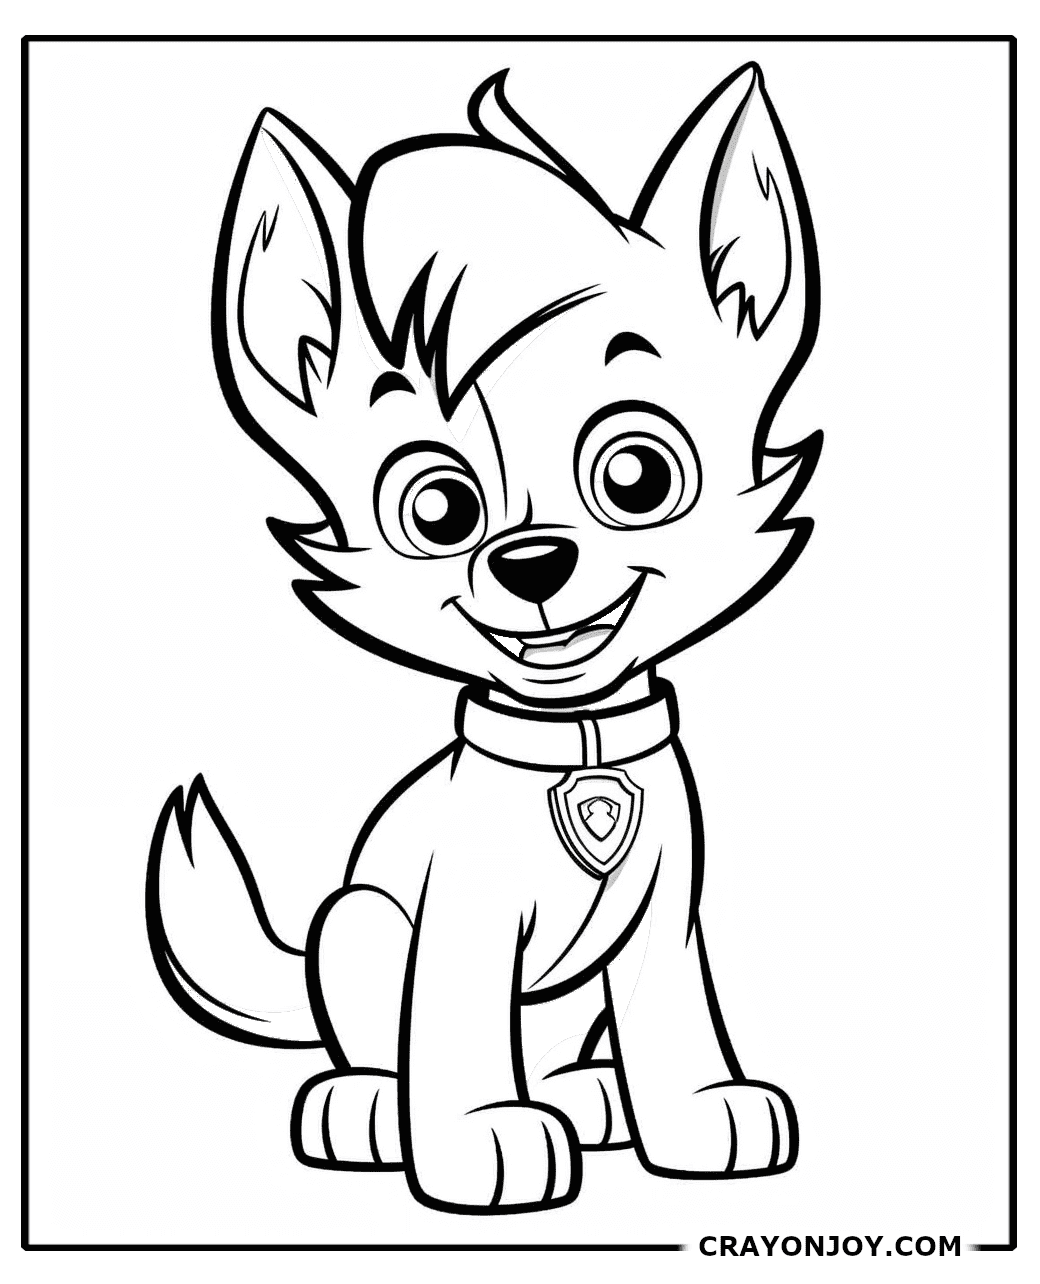 Free Printable Paw Patrol Skye Coloring Pages for Kids and Adults